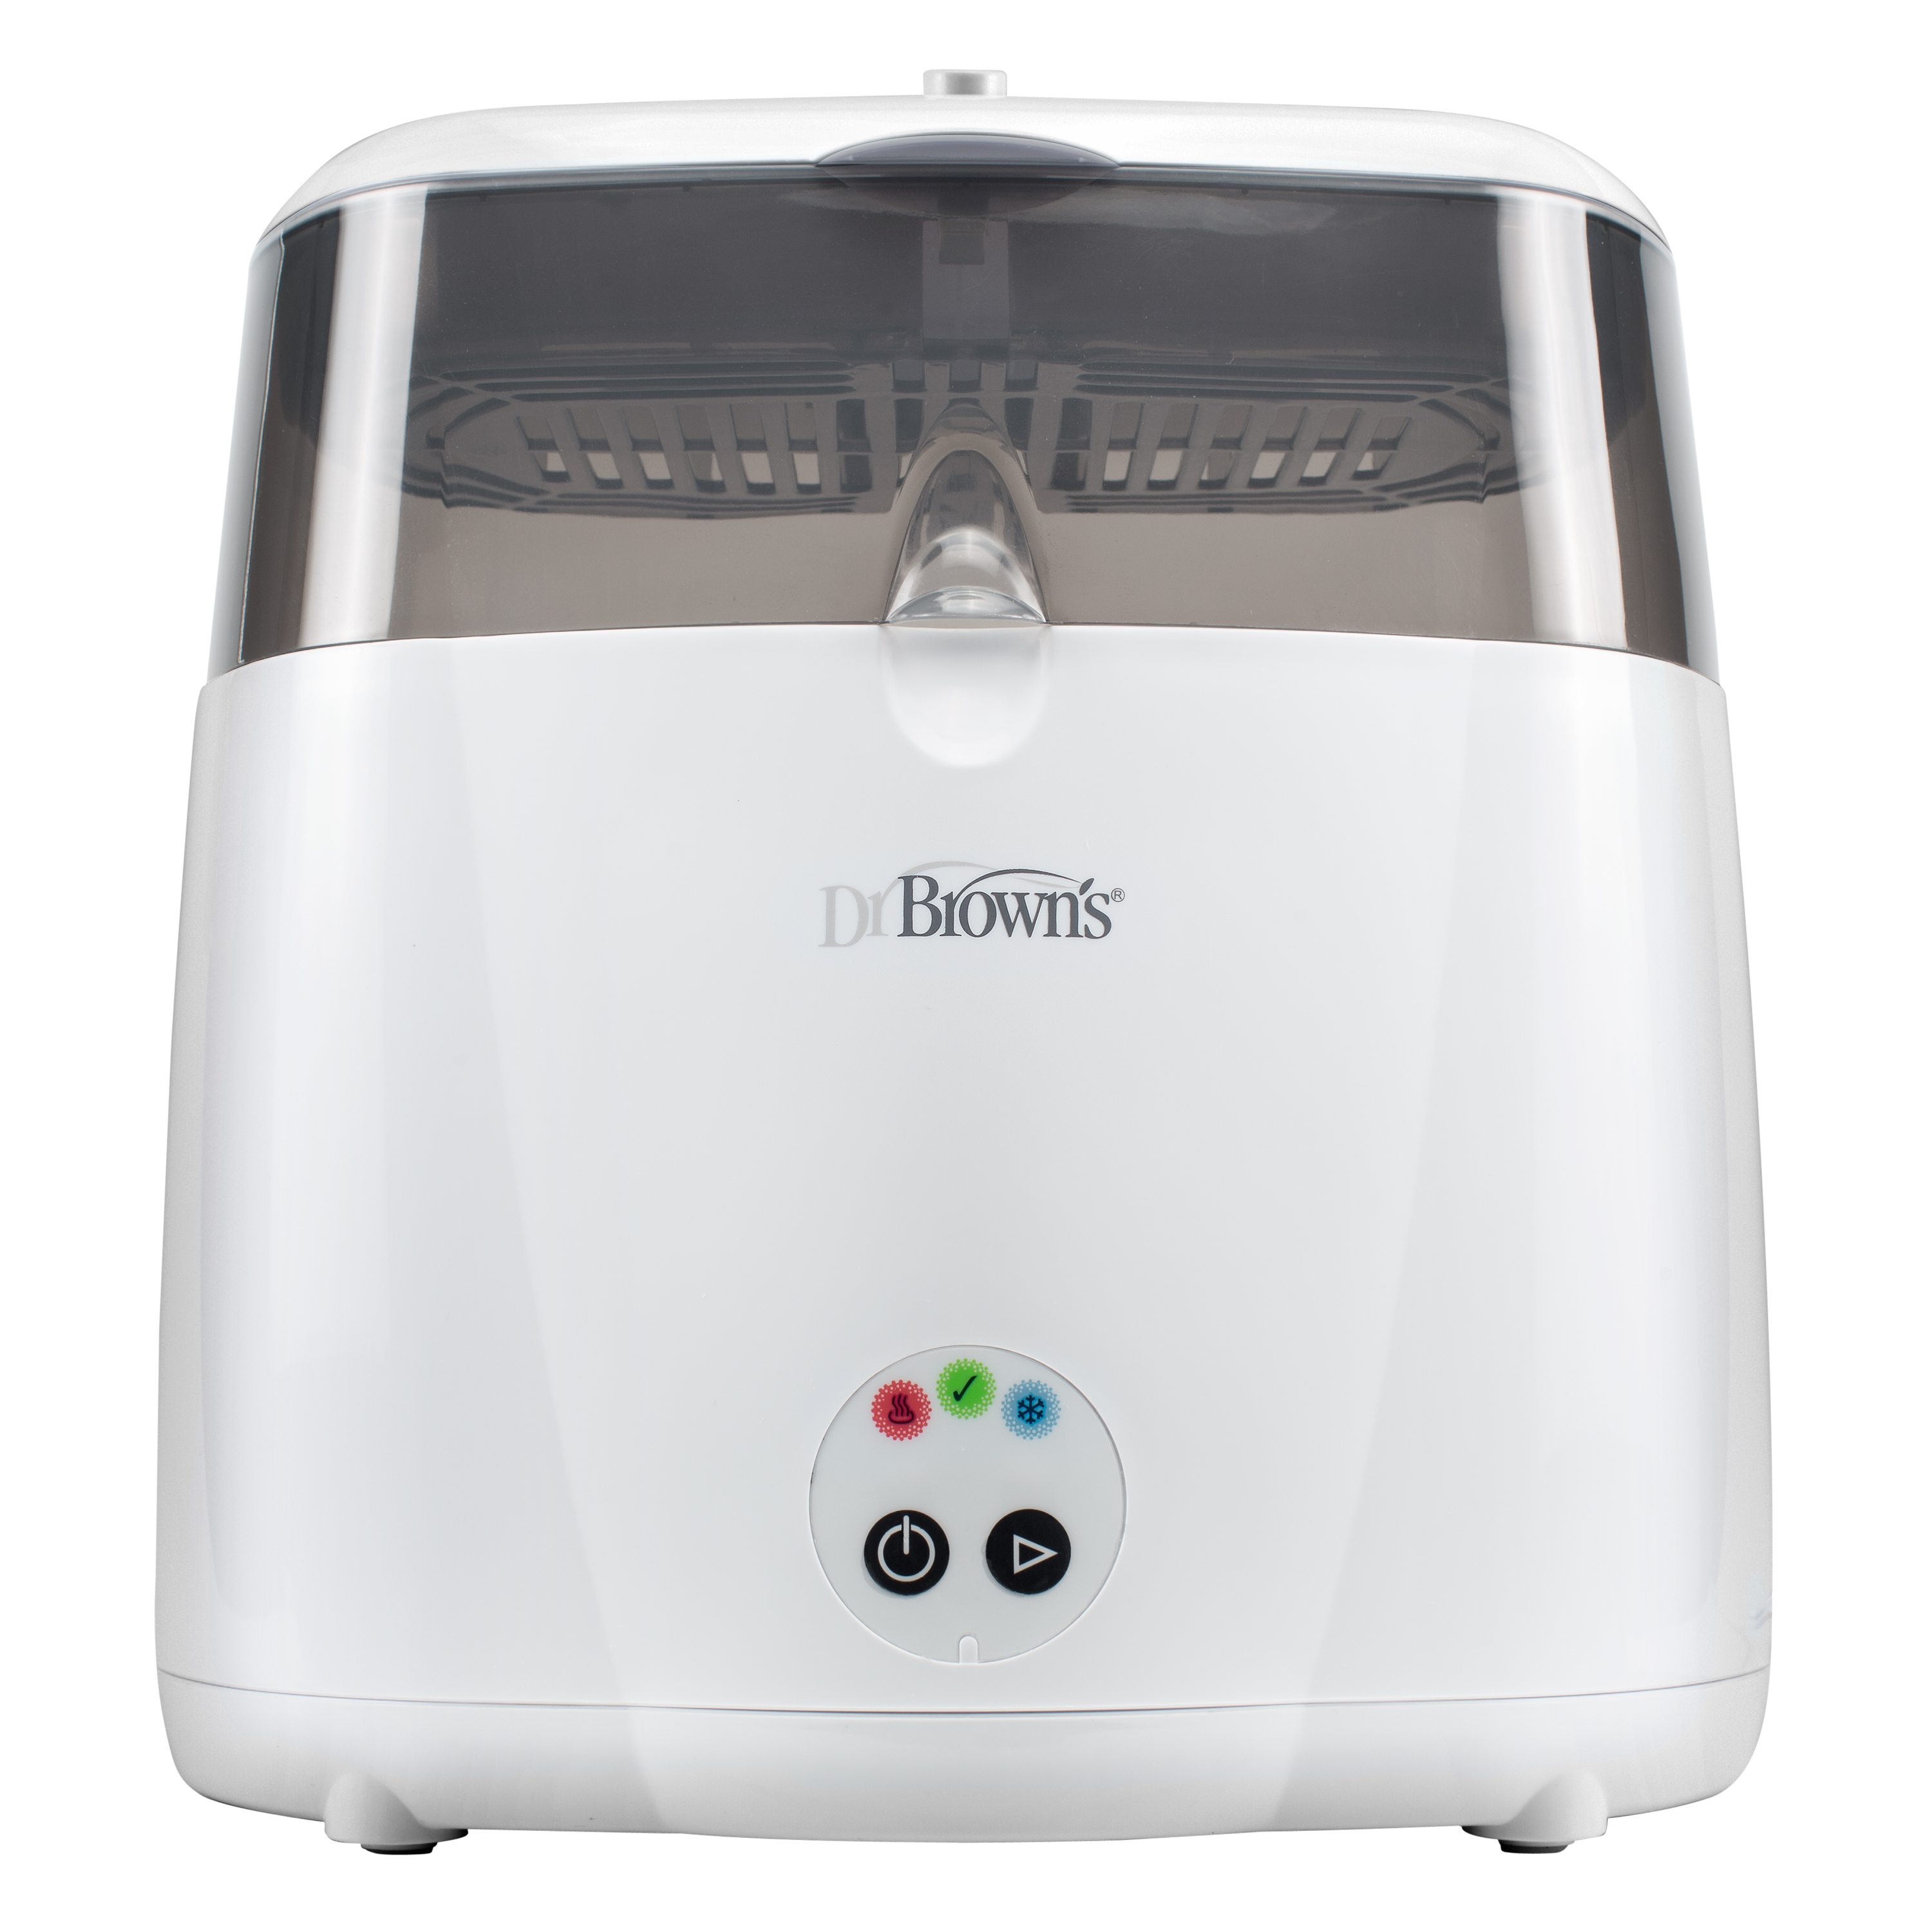 Dr. Brown's Deluxe Electric Sterilizer for Baby Bottles and Other Baby Essentials - image 3 of 12